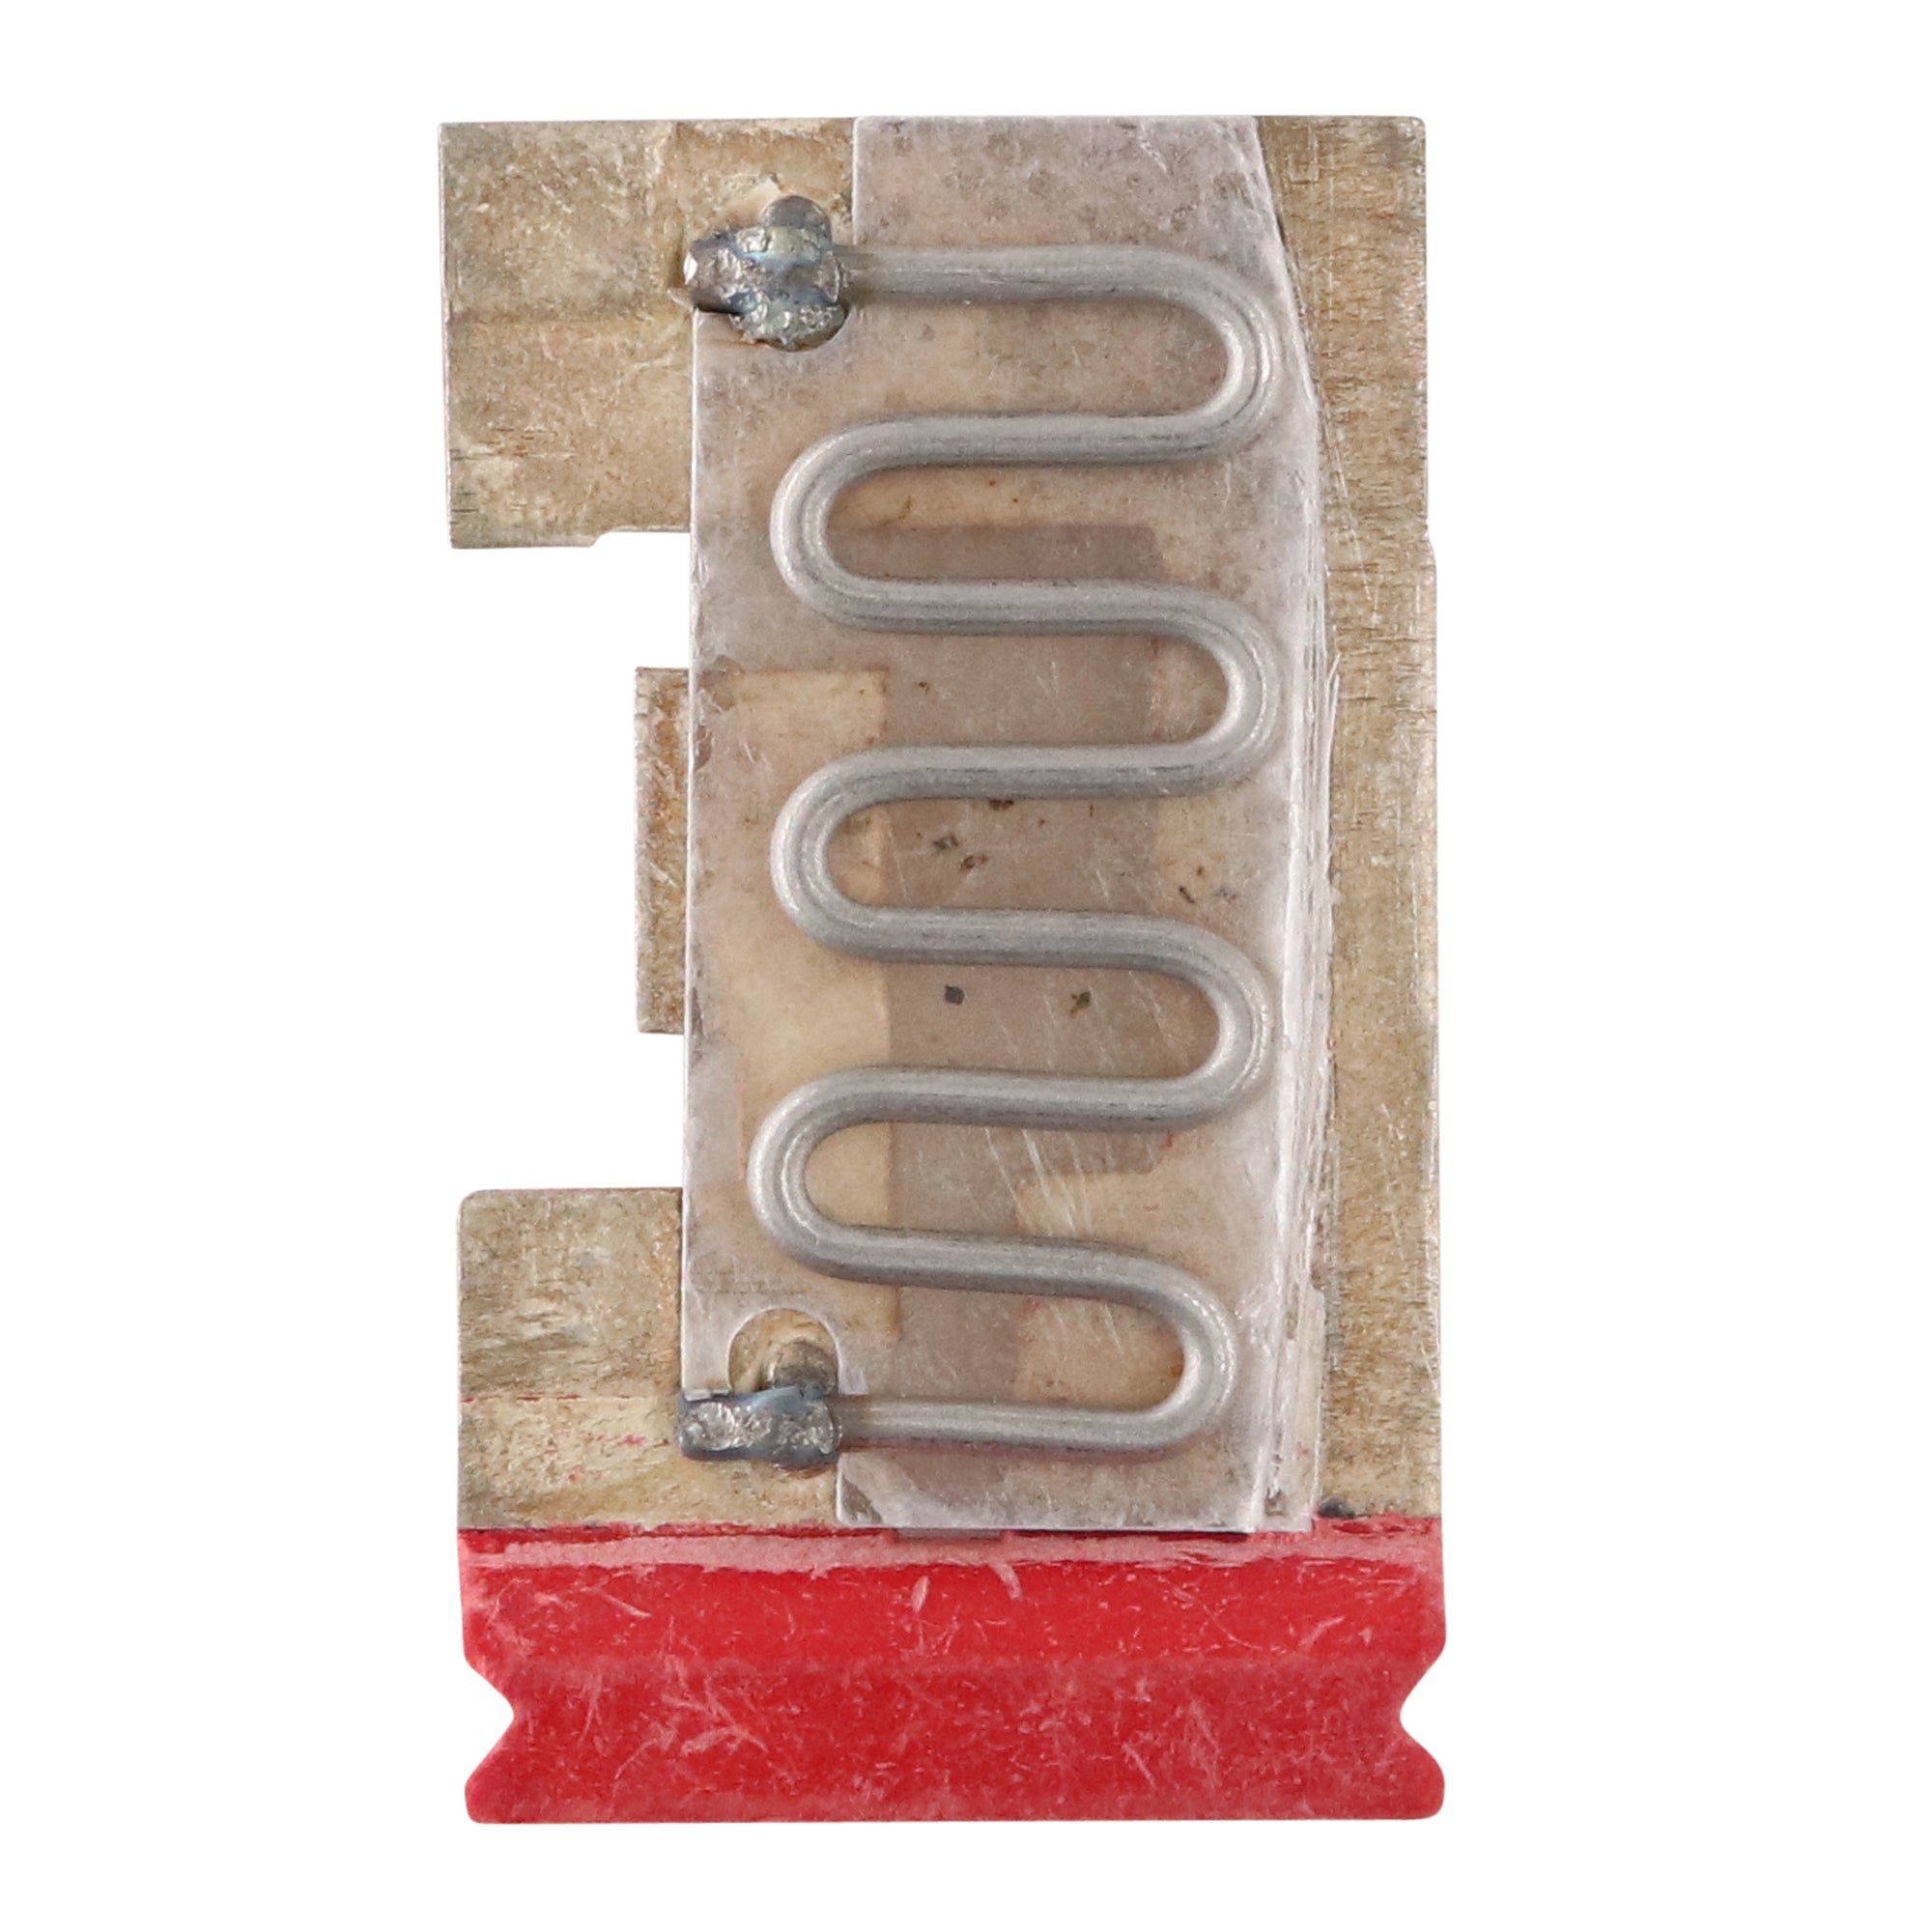 EATON, EATON MSH8.A OVERLOAD THERMAL HEATING ELEMENT MODULE